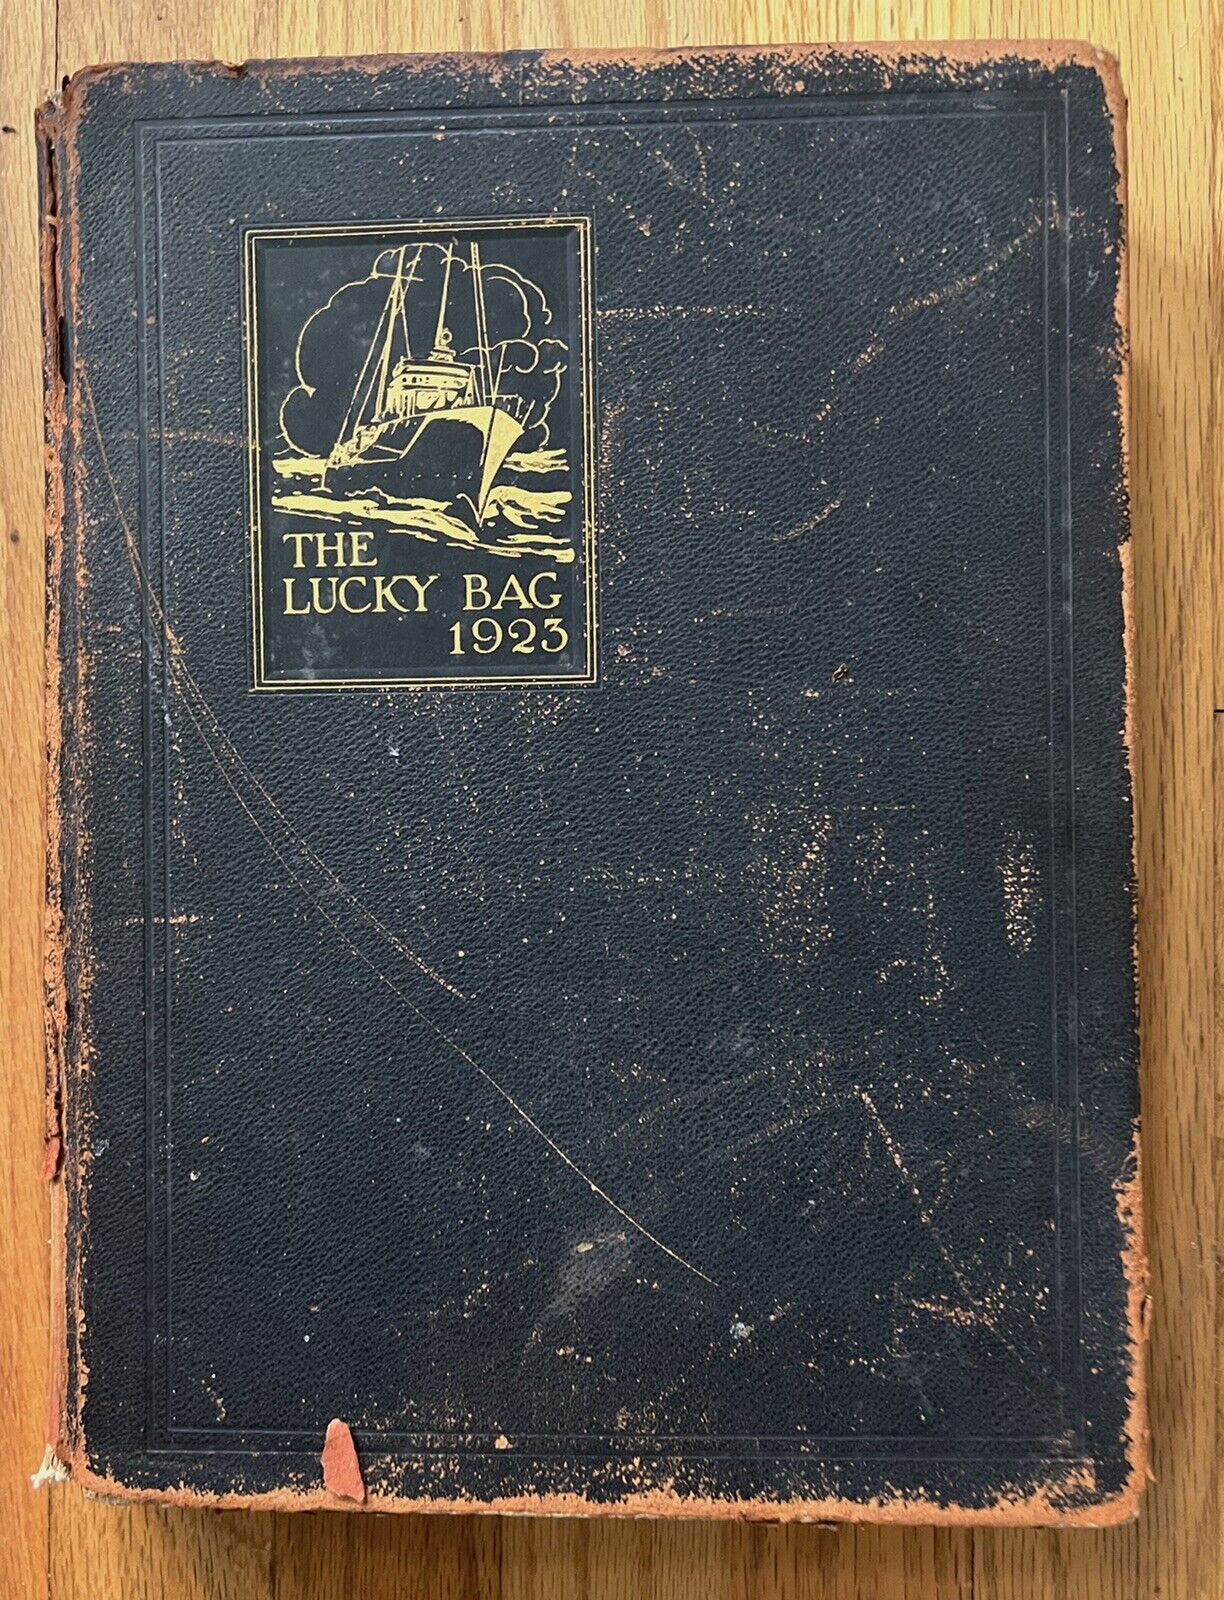 US Naval Academy Annual Yearbook 1923 The Lucky Bag 1923